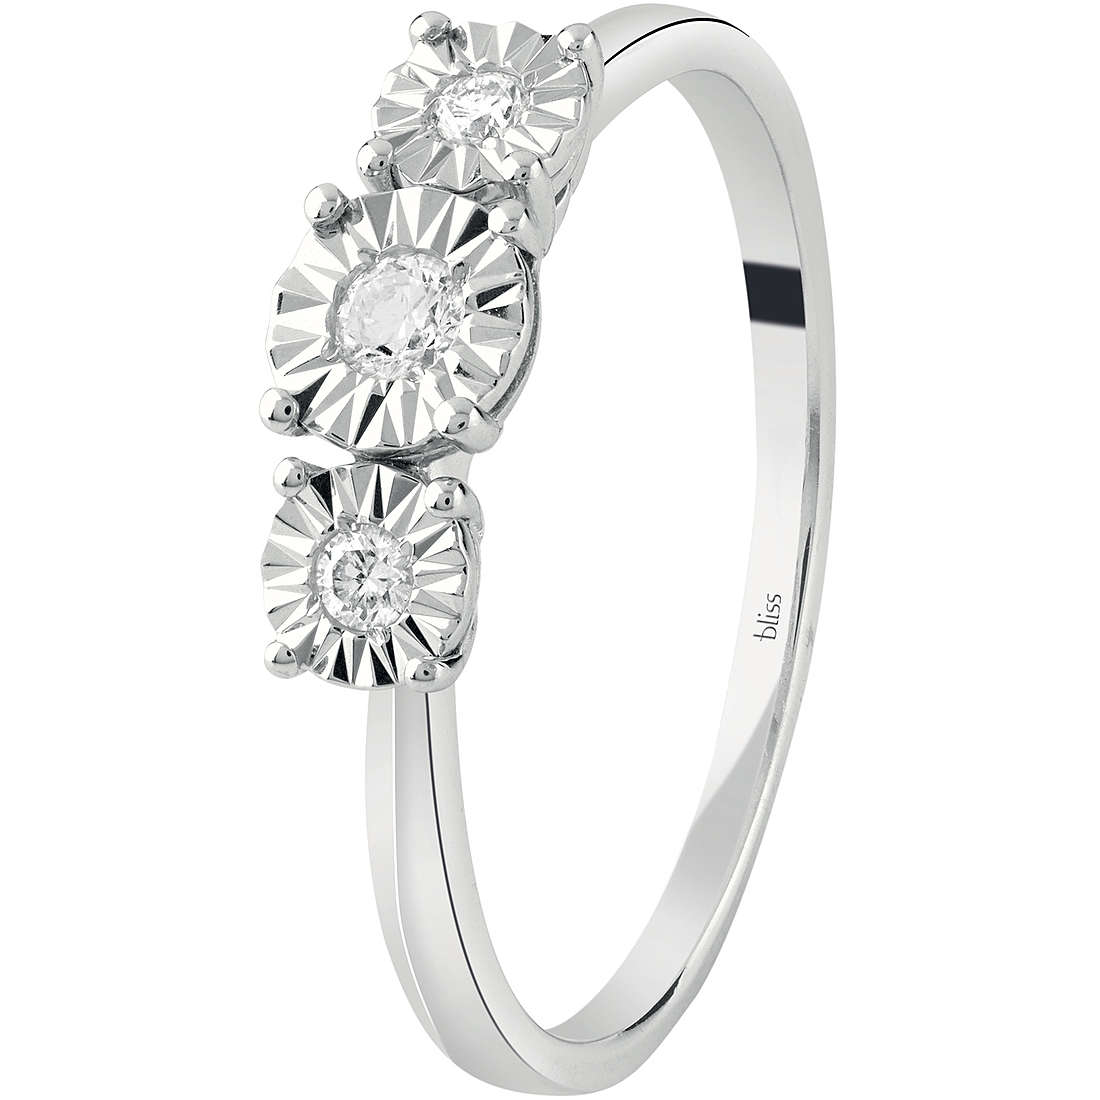 BLISS - Trilogy Ring with Diamonds